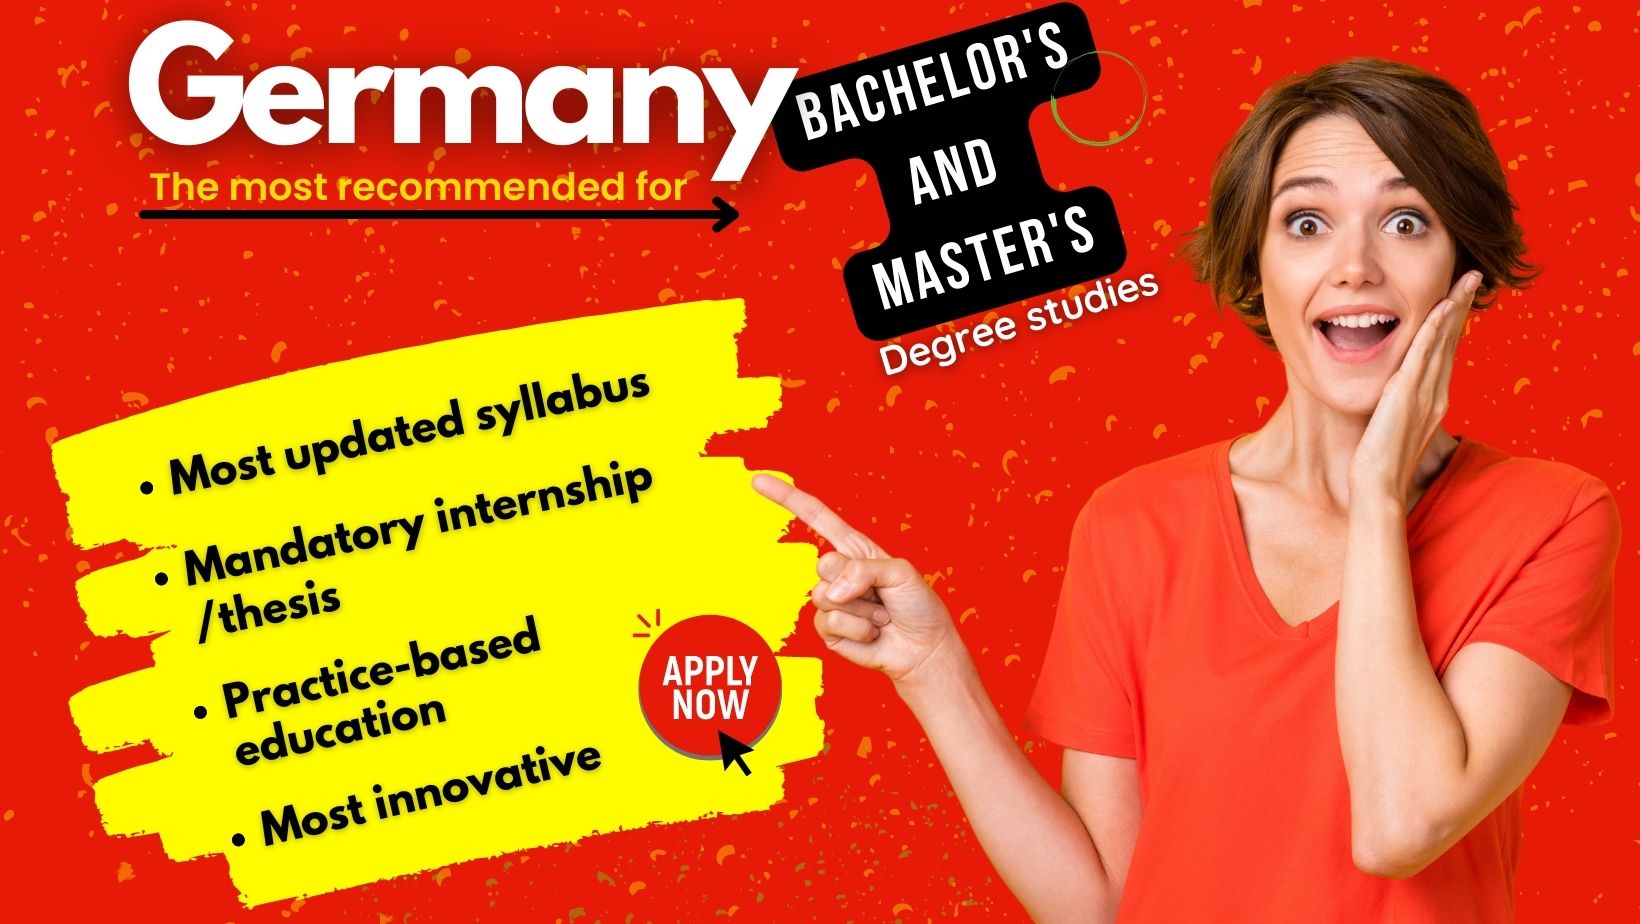 Study in Germany - Bachelors Degree